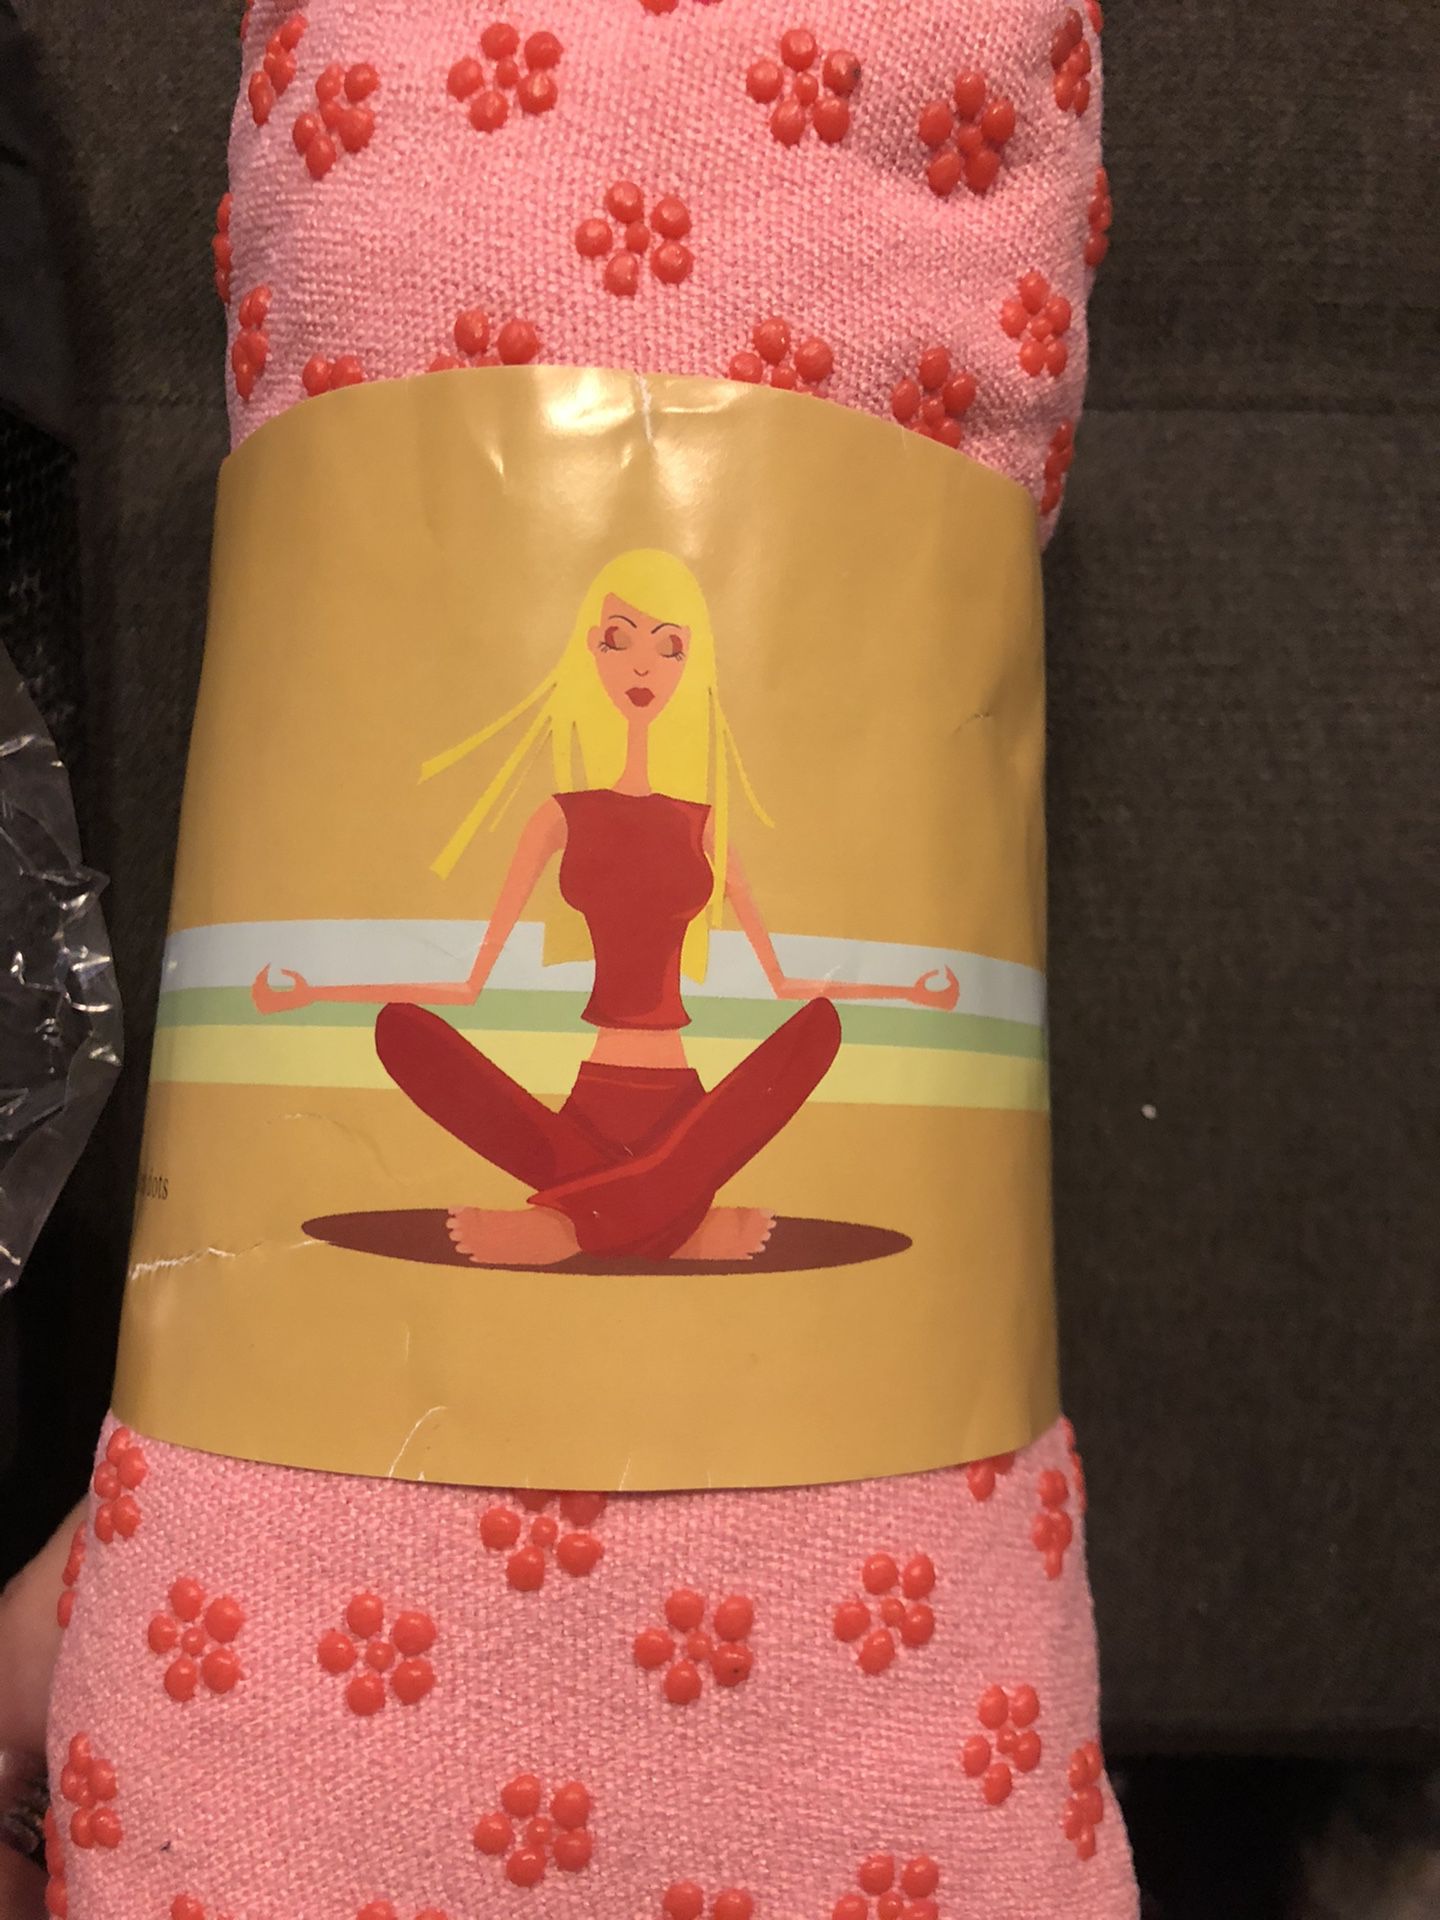 NEW - PATENTED NON-SKID YOGA MAT TOWEL with BAG